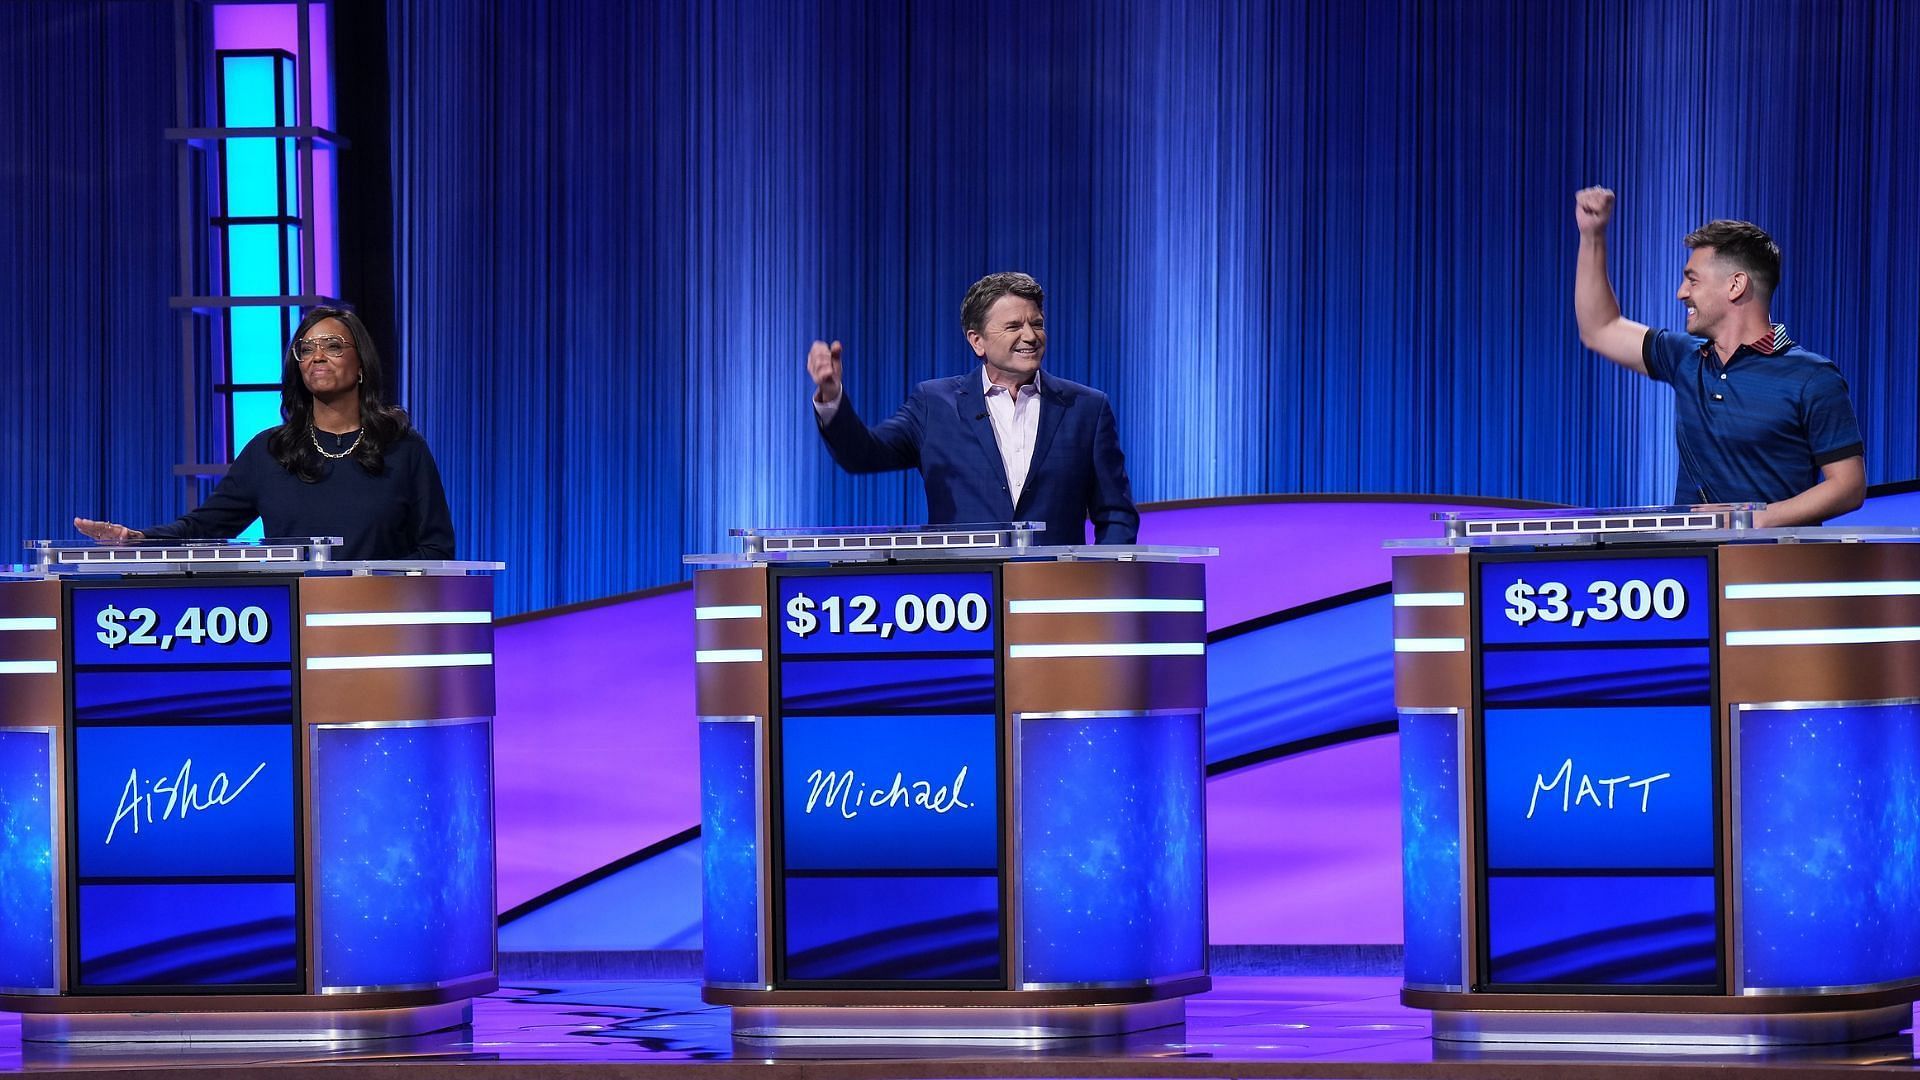 Celebrity Jeopardy! aired the fourth quarterfinals this Sunday